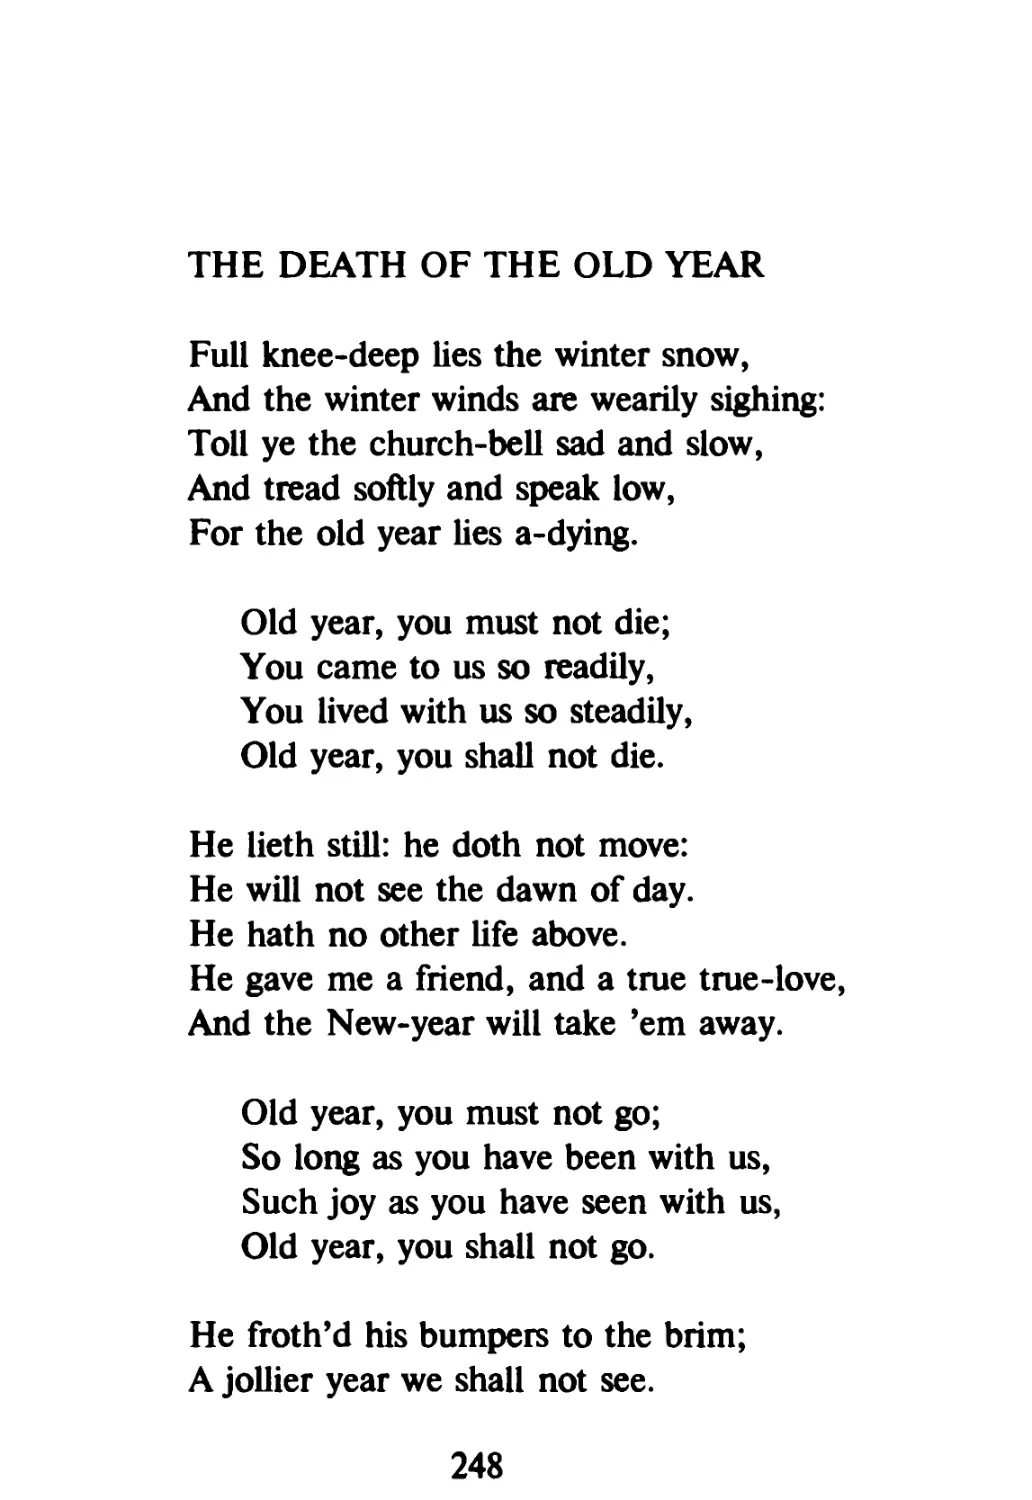 The death of the old year